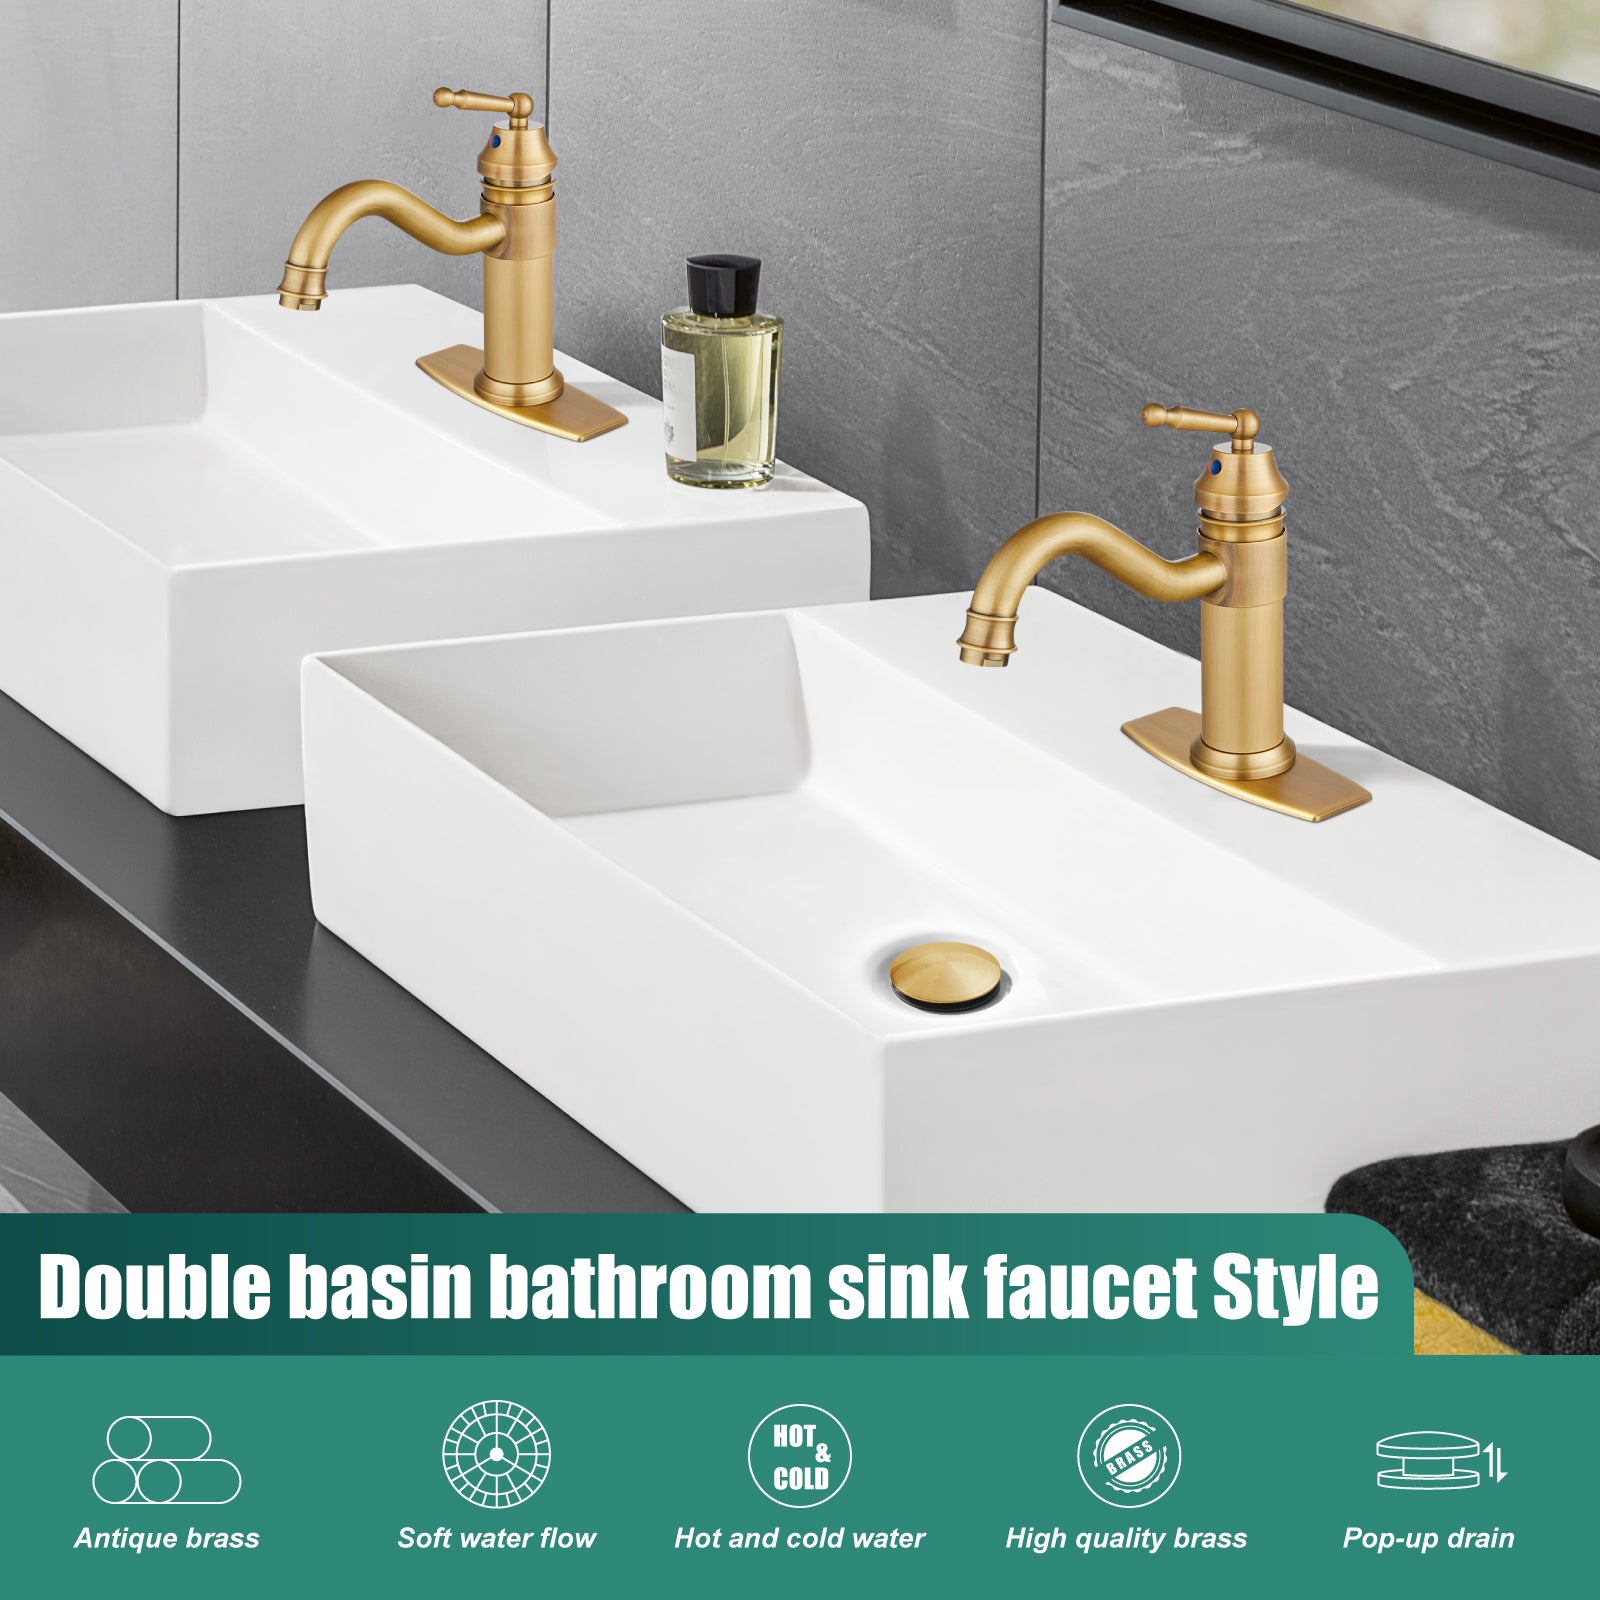 Heyalan Bathroom Sink Faucet  Deck Mount Single Hole One Handle Lavatory Assembly Brass Vanity Basin Mixer Tap Pop Up Drain Included Hot and Cold Water